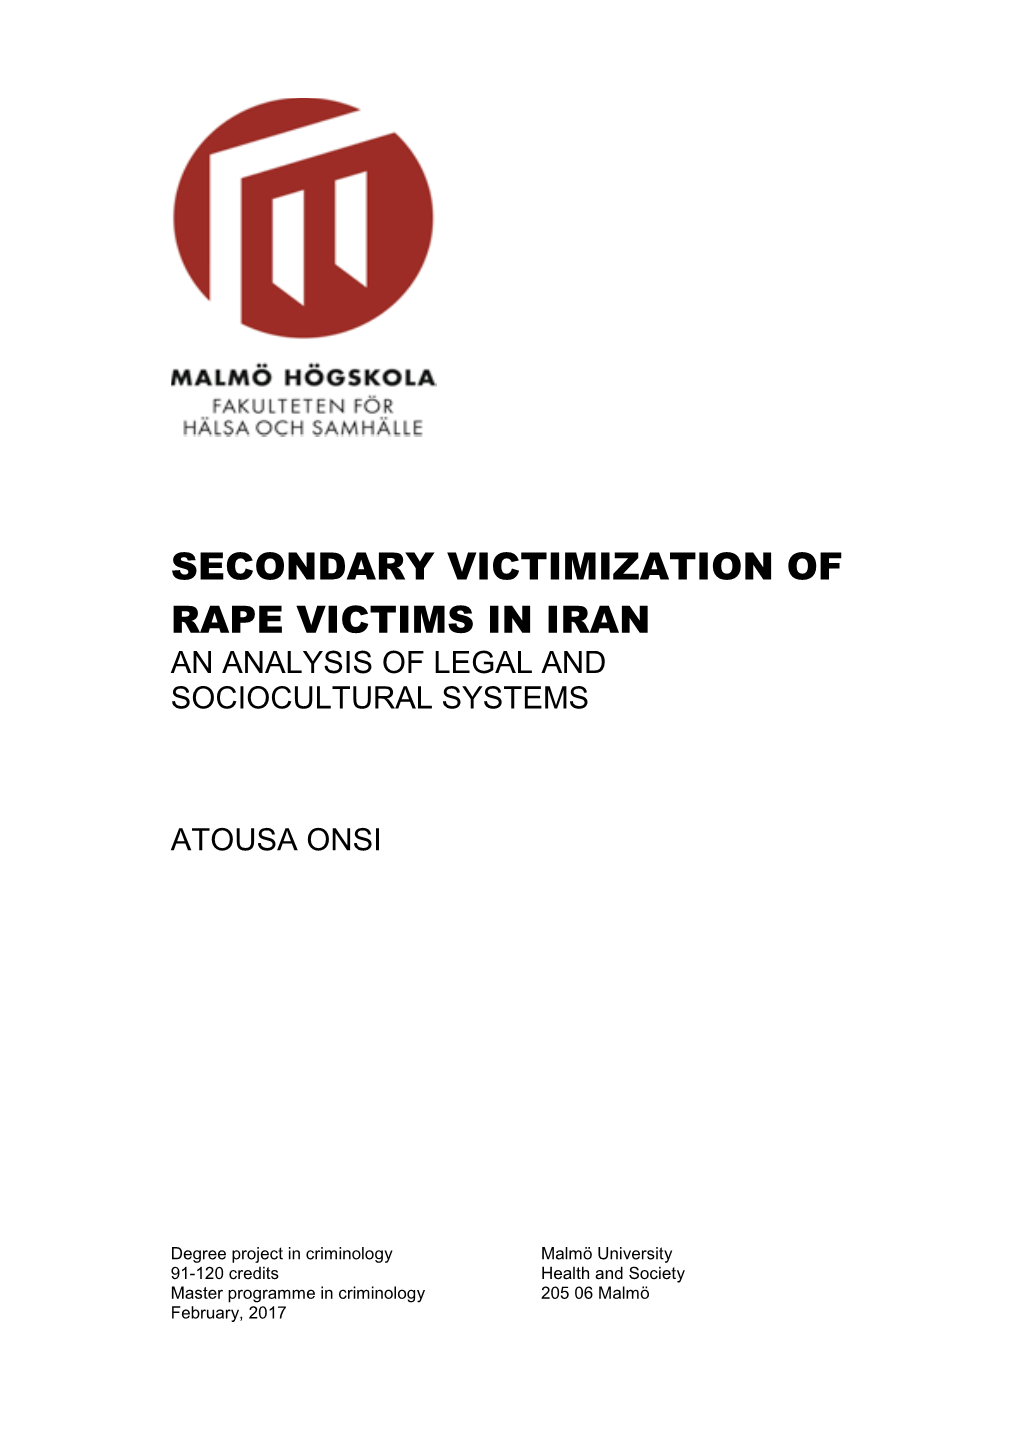 Secondary Victimization of Rape Victims in Iran an Analysis of Legal and Sociocultural Systems